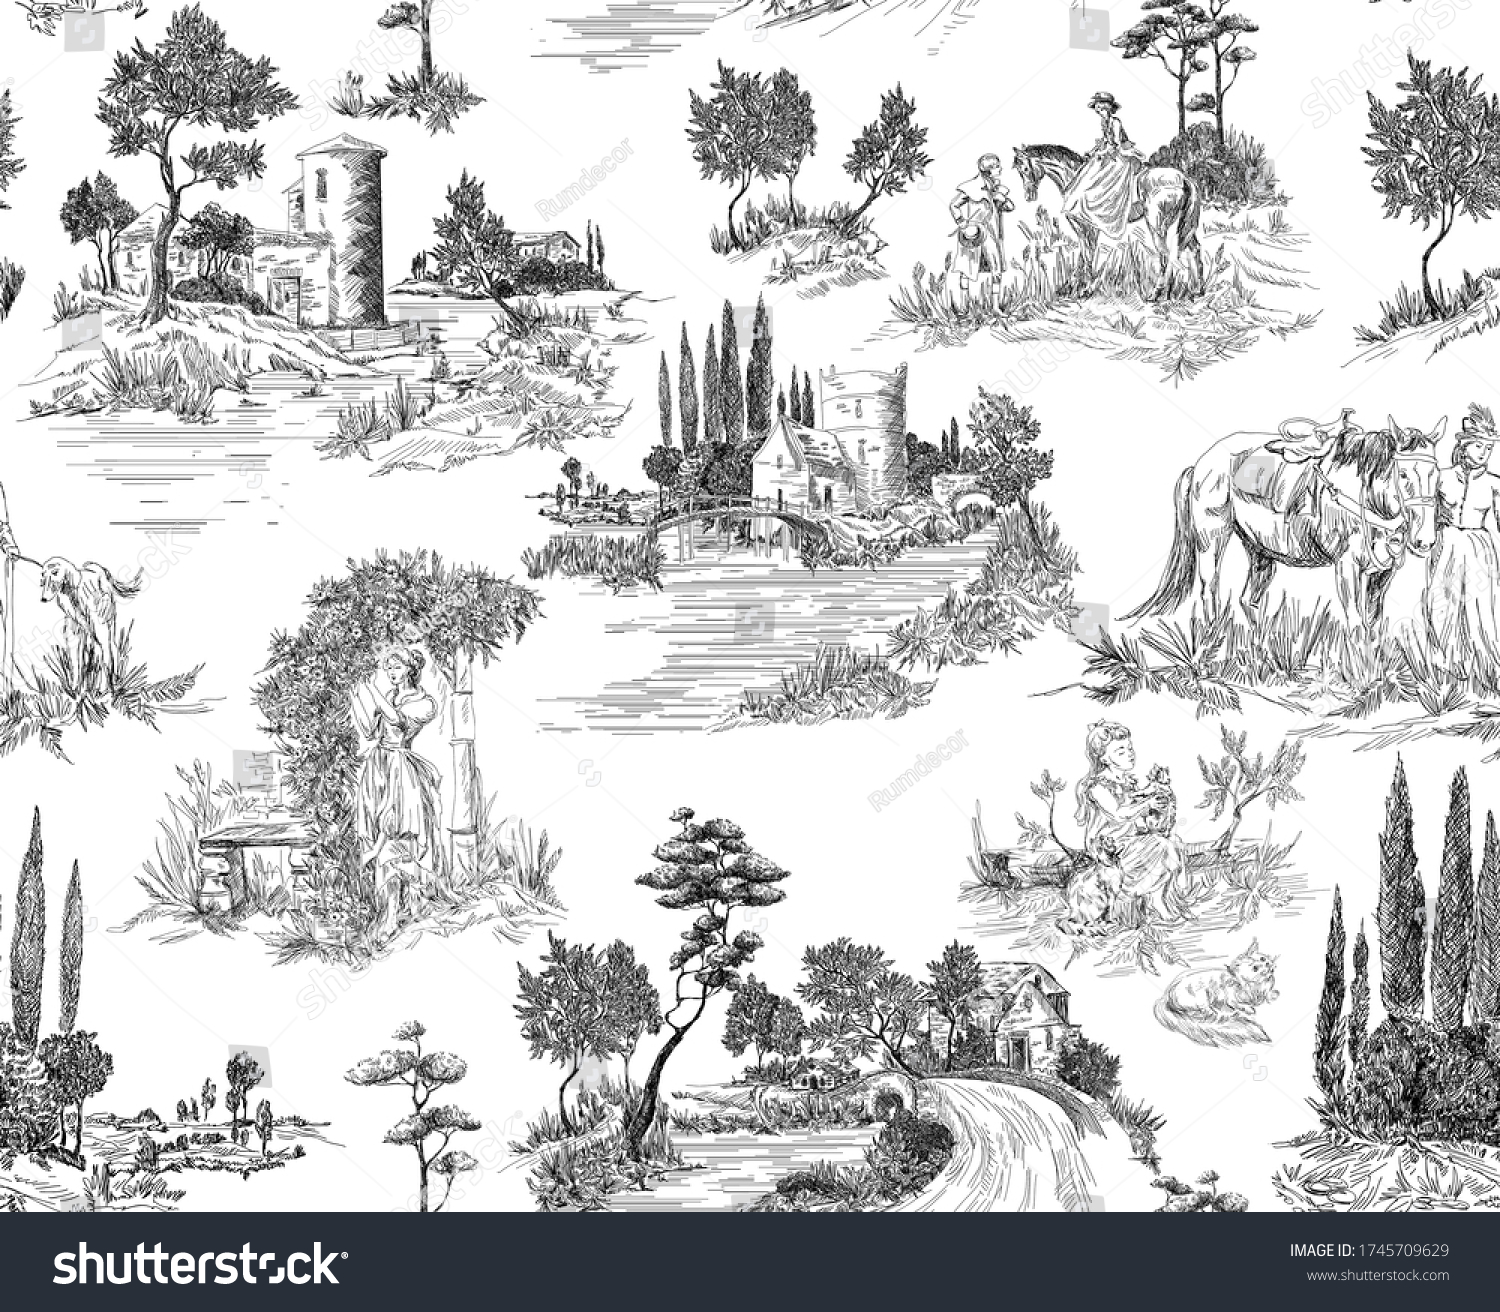 SVG of Pattern in toile de jouy stile with landscape with castles, river and houses and trees, walking people, woman with flowers, horse, black and white svg